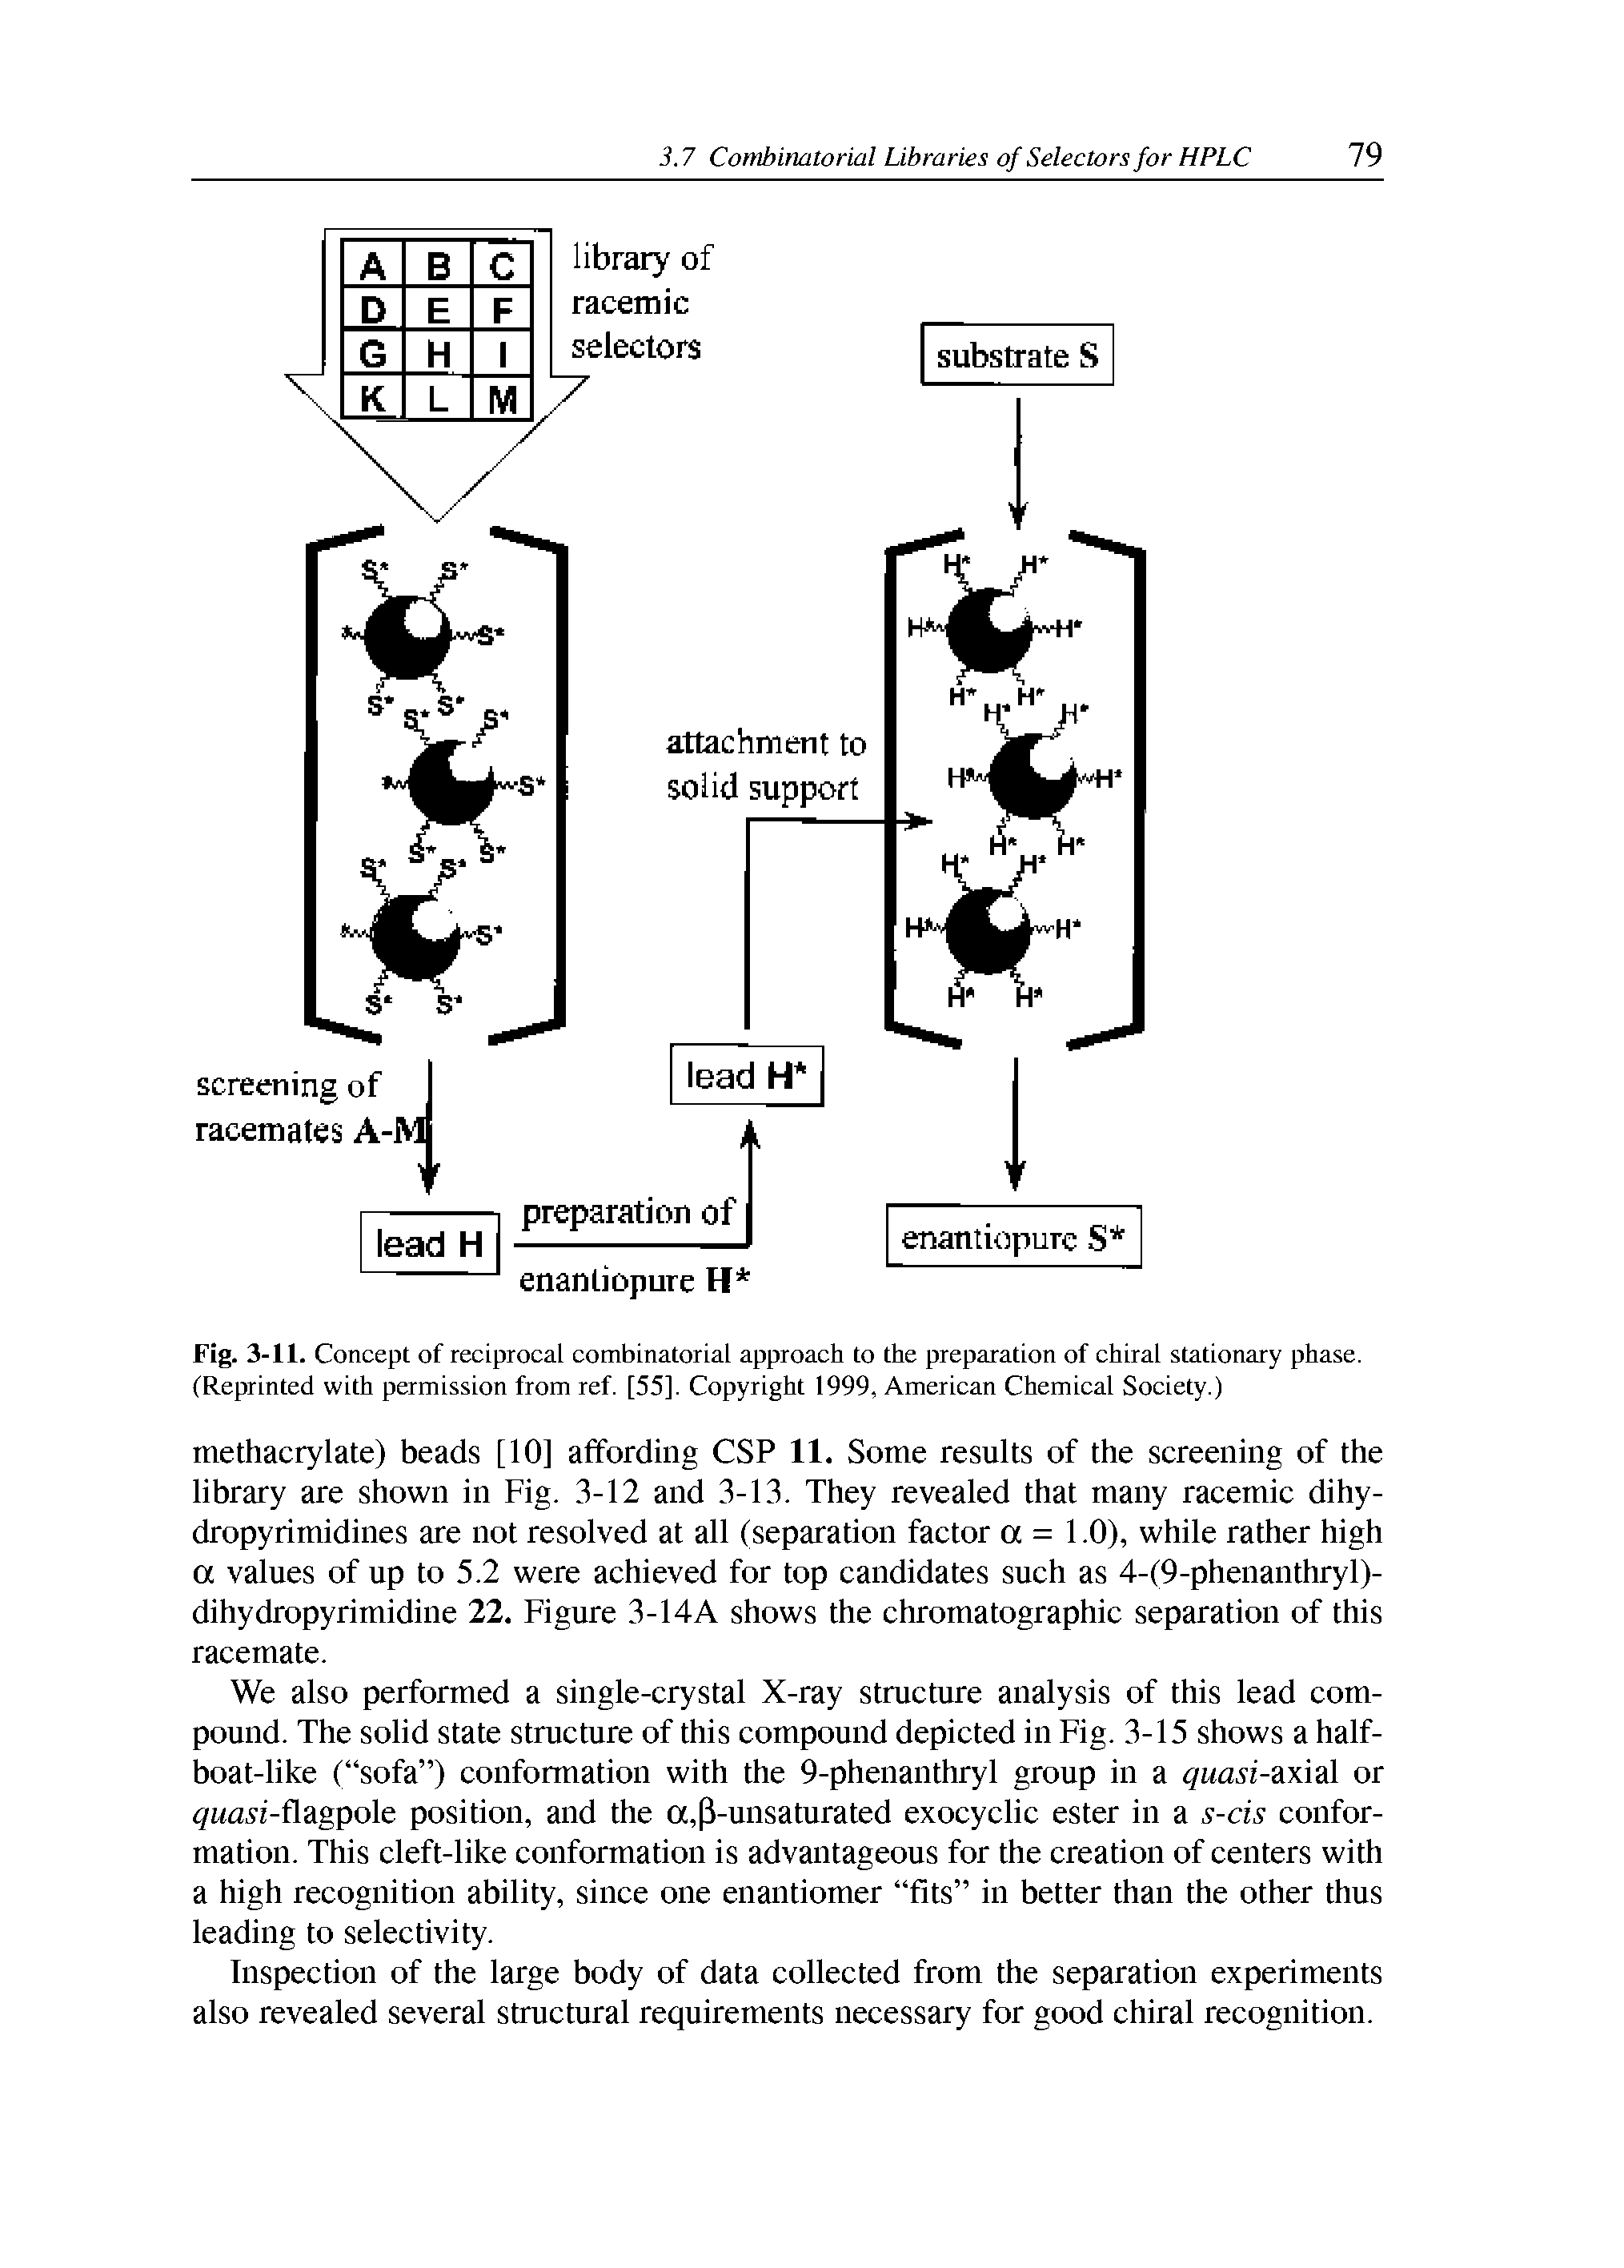 Fig. 3-11. Concept of reciprocal combinatorial approach to the preparation of chiral stationary phase. (Reprinted with permission from ref. [55]. Copyright 1999, American Chemical Society.)...